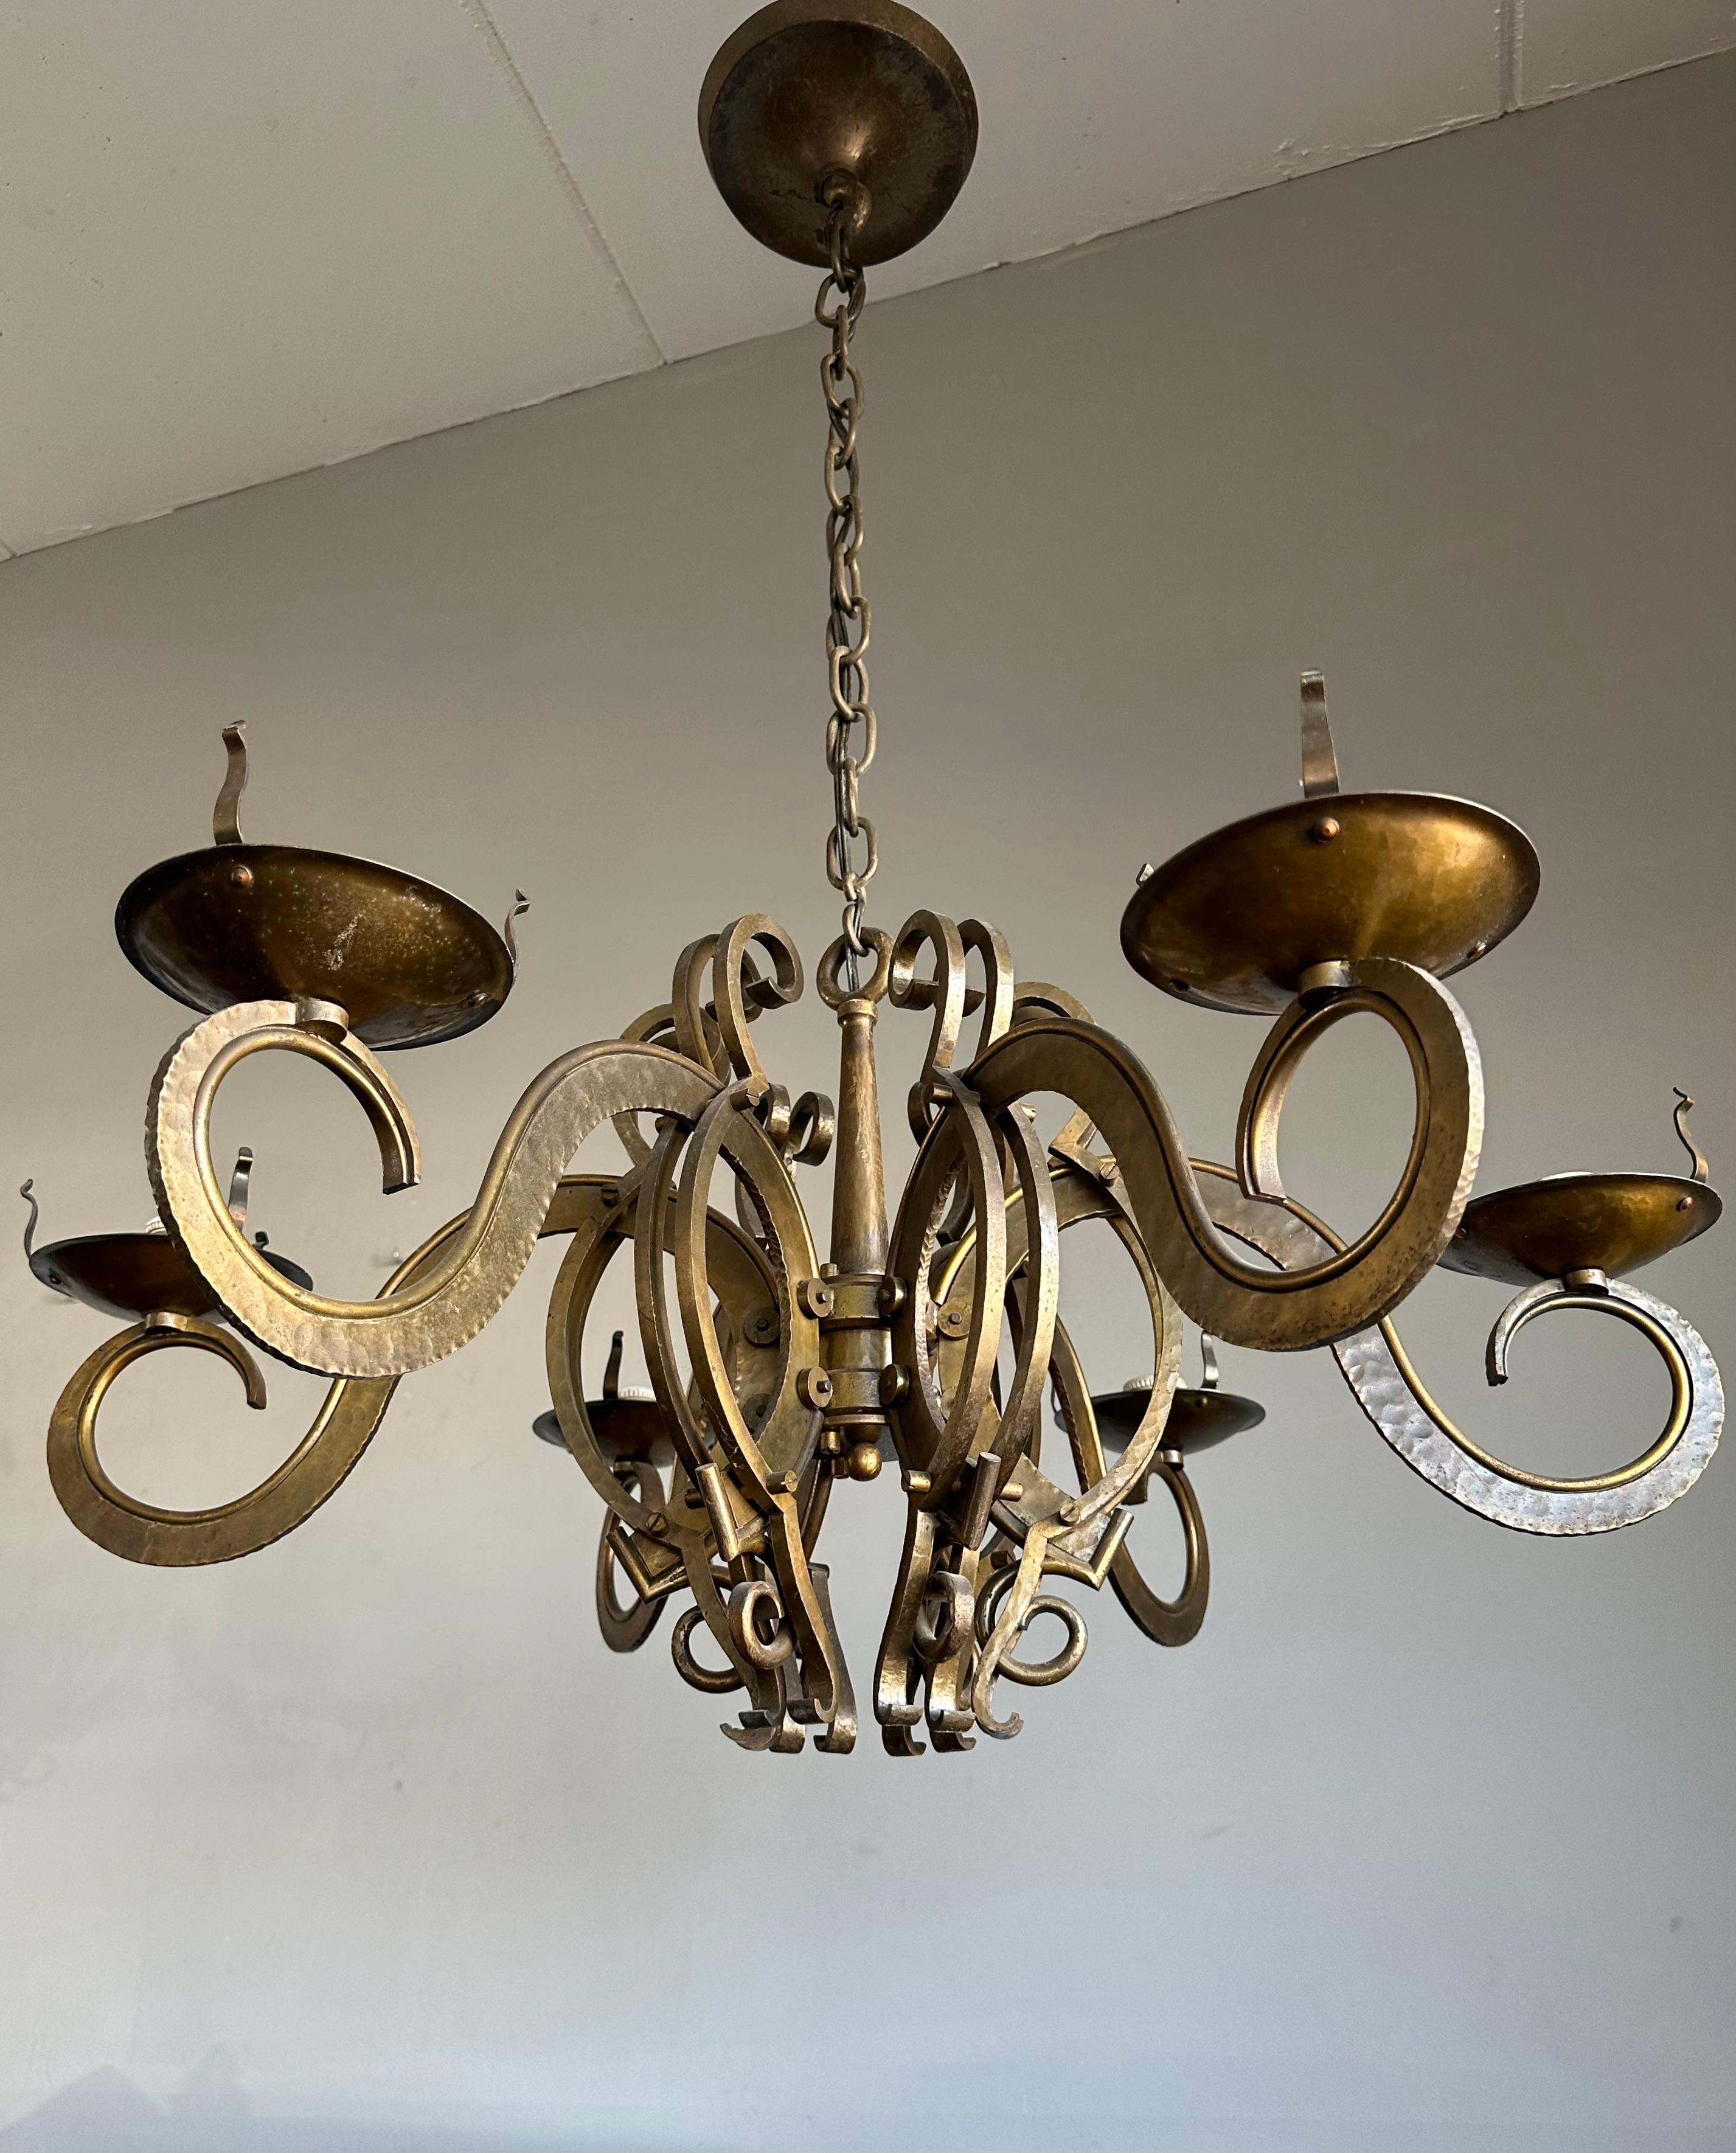 Rare and amazing workmanship, brass and bronze Arts and Crafts pendant.

If you live or work in an Arts & Crafts building and you are looking for the perfect fixture to grace your living or work space then this unique and all handcrafted, six-light